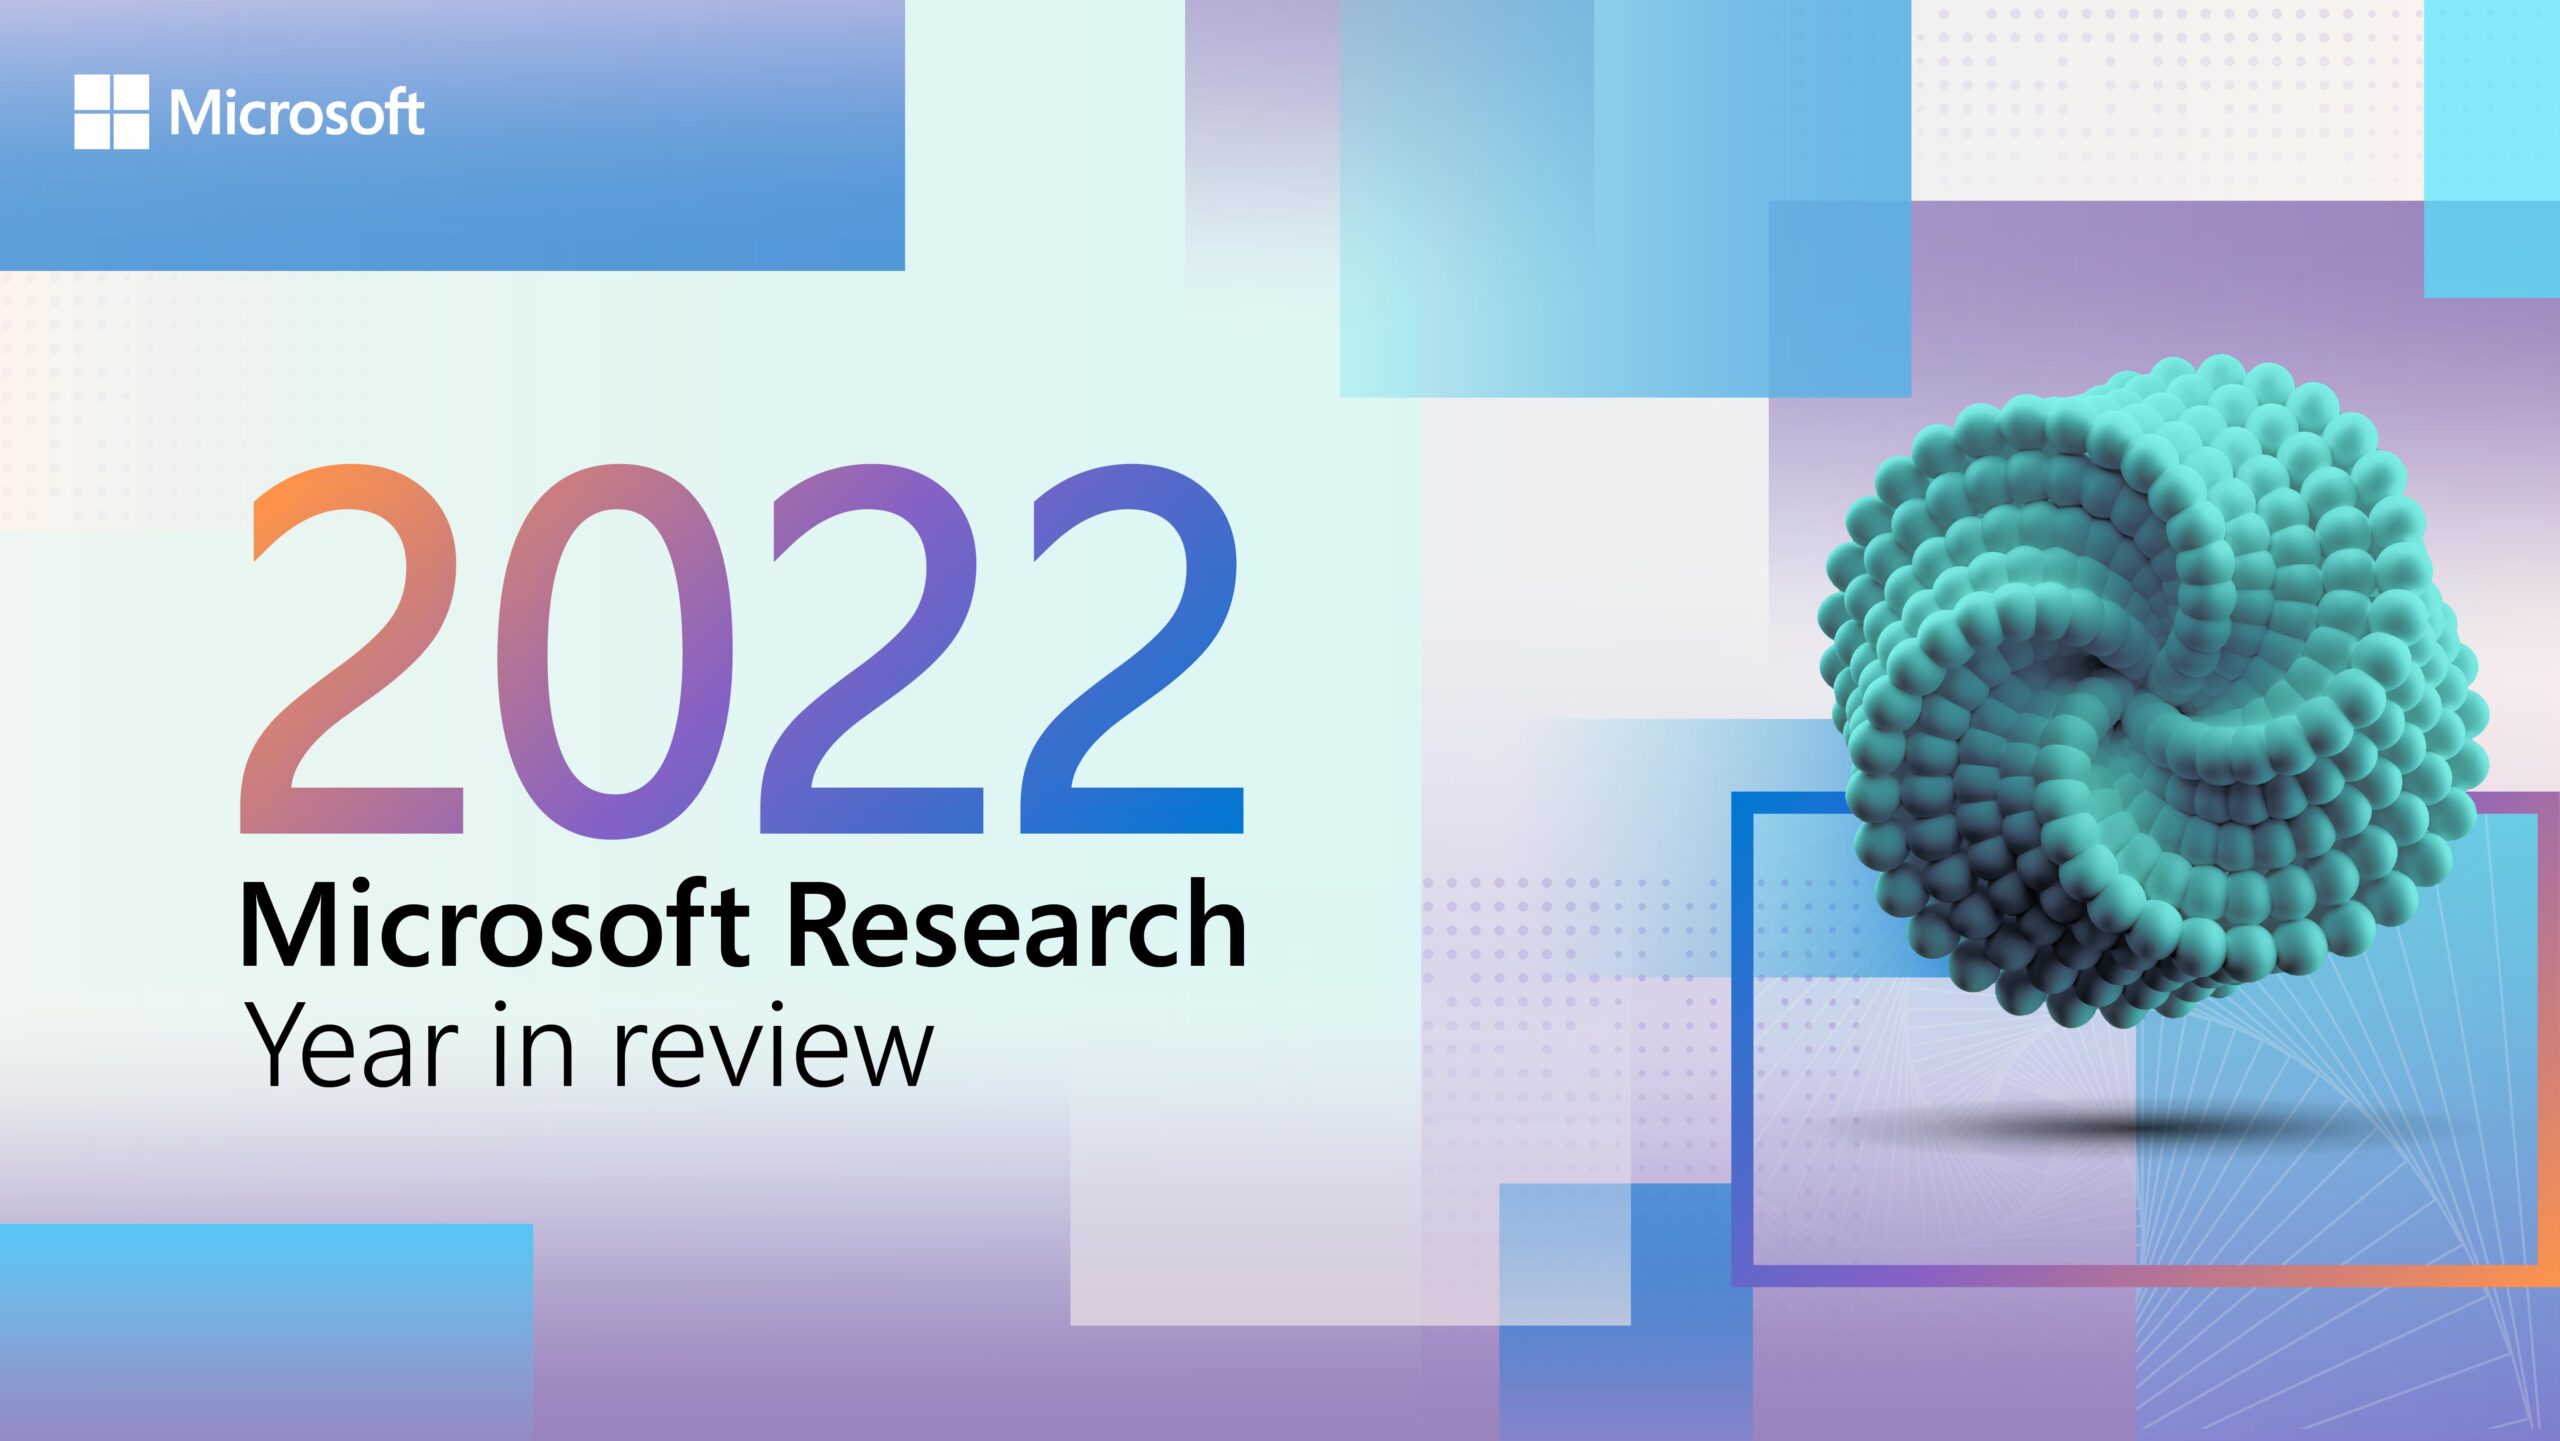 Microsoft Research – Emerging Technology, Computer, and Software Research